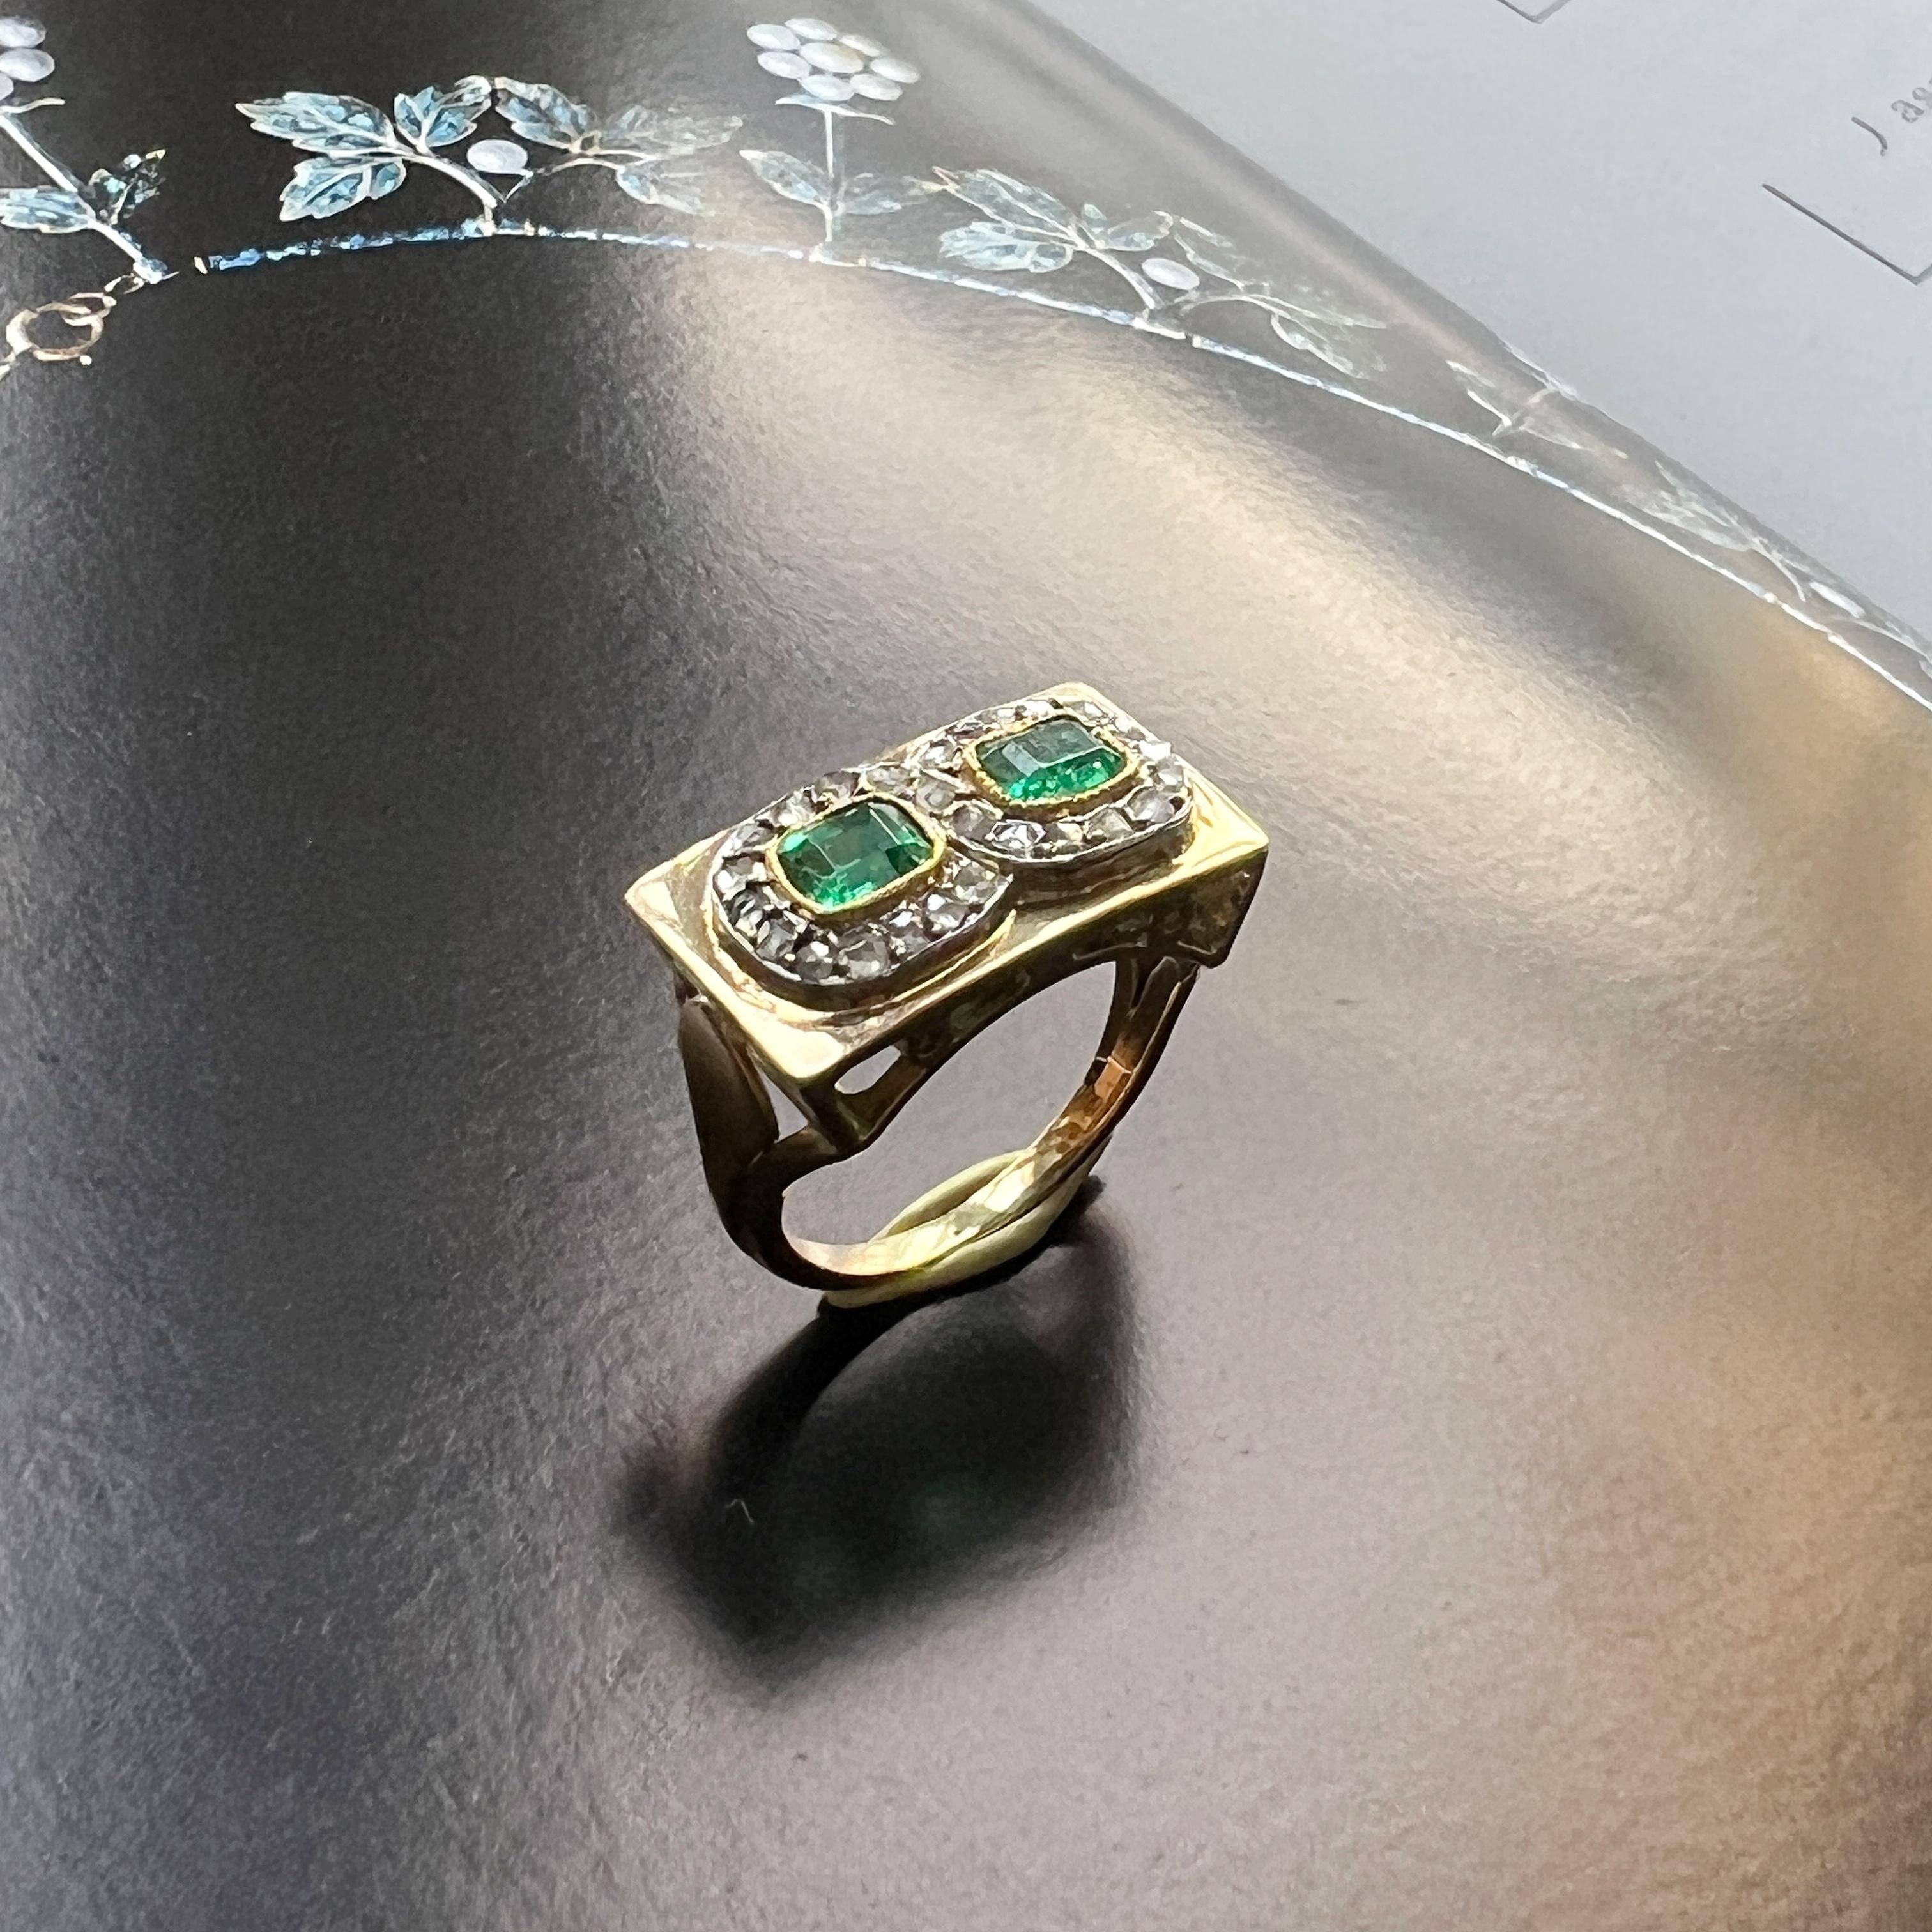 For sale a beautiful French made, 18K gold tank ring, which transports you to the glamorous era of the 1940s.

This chic ring encapsulates the essence of an eternity motif, accentuated by two resplendent emeralds framed by a series of captivating